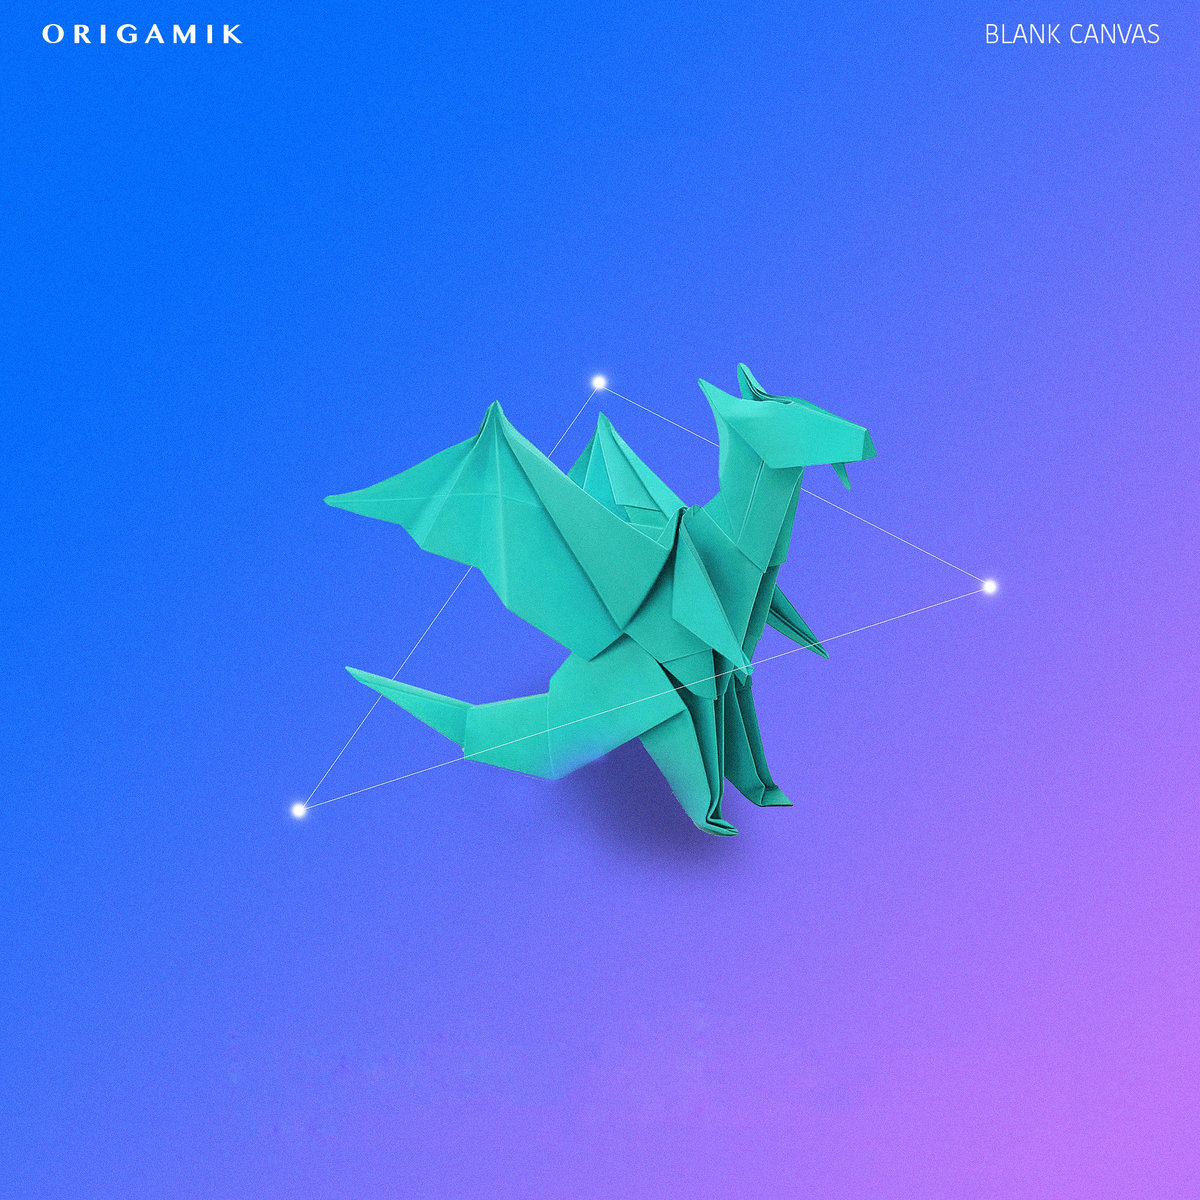 Origamik - "Blank Canvas" (Release)